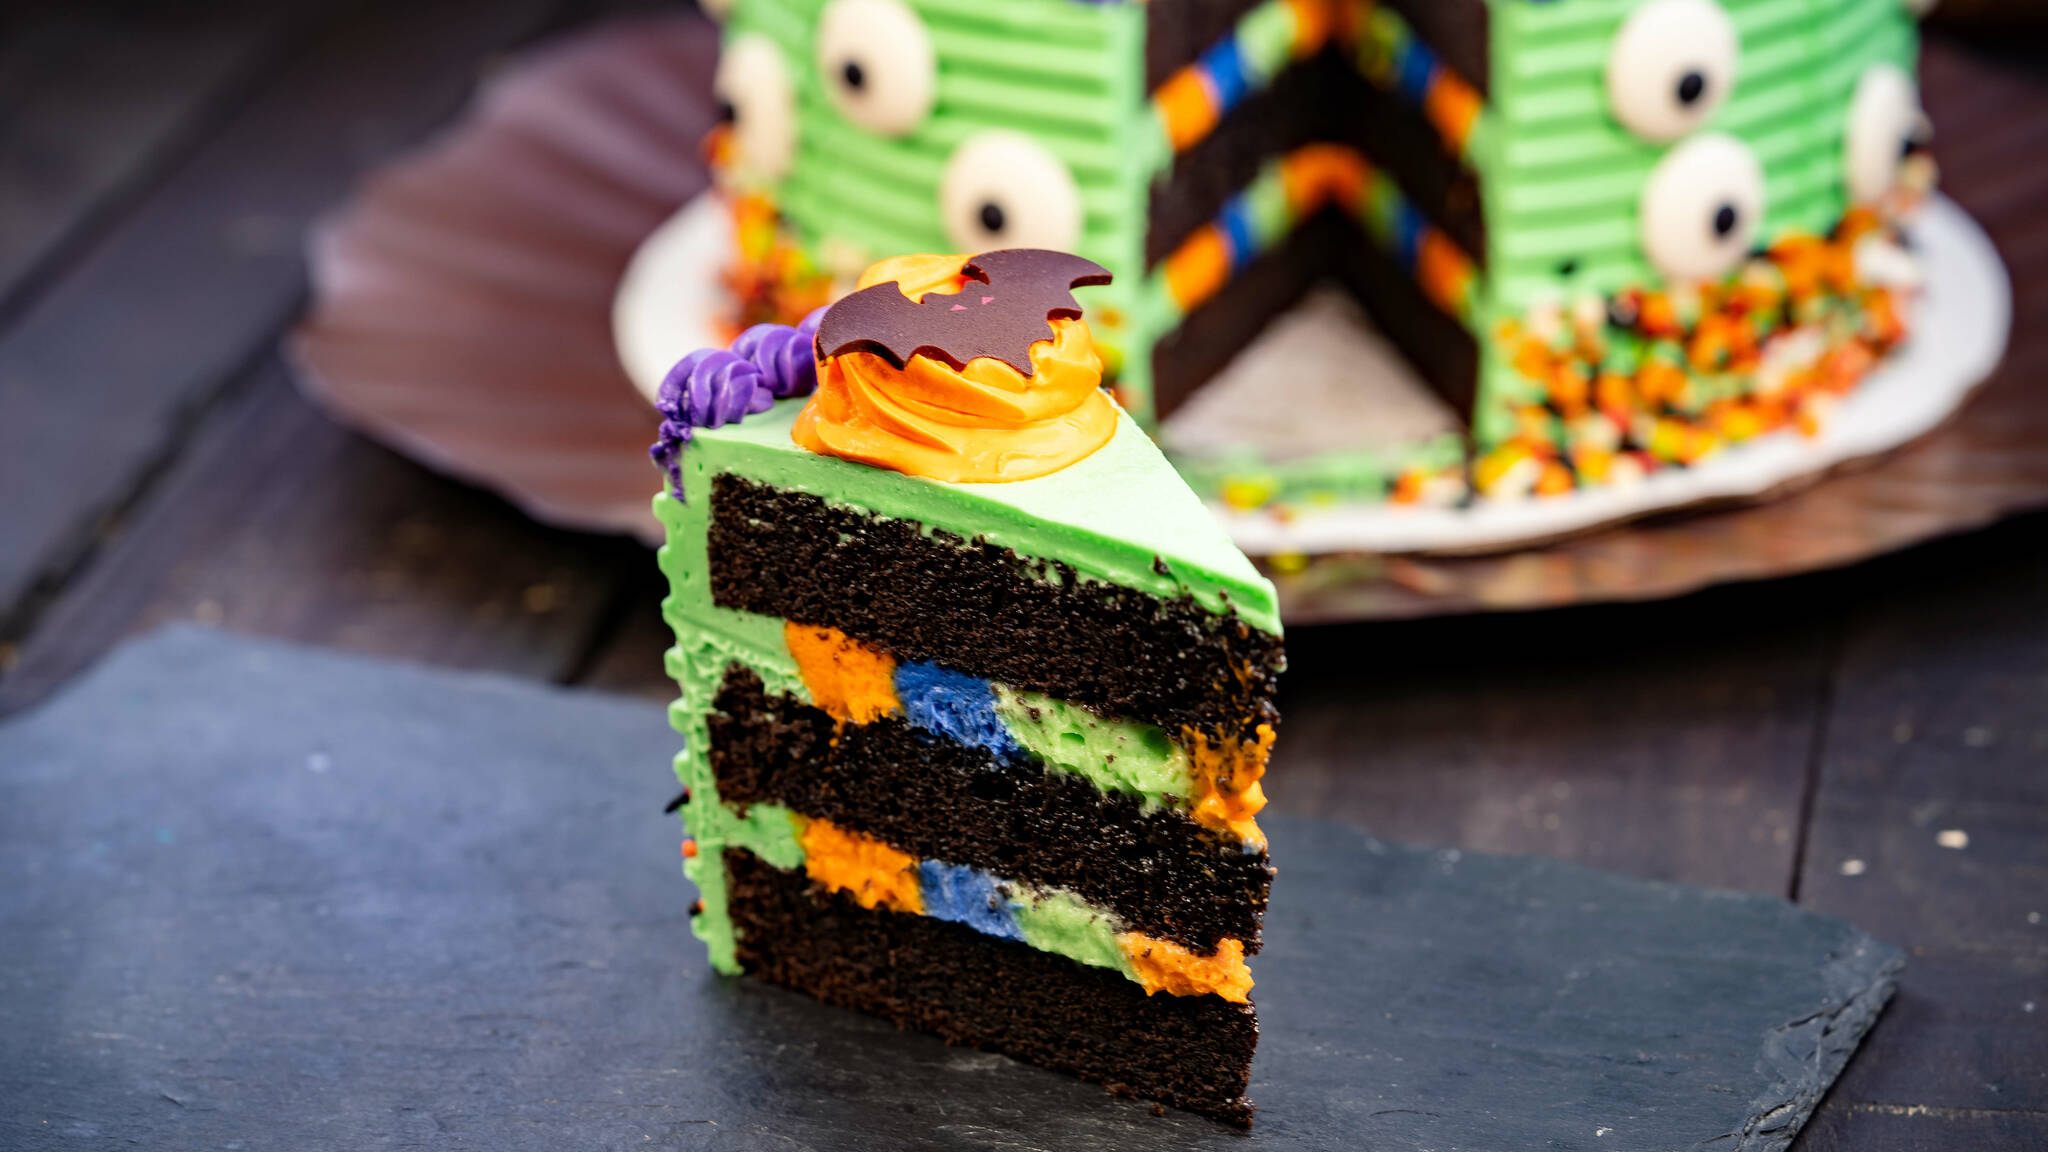 Halloween-themed cake (Plaza I1nn at Disneyland Park in Anaheim, Calif.) - Devil's food cake, colorful white chocolate mousse and buttercream. Available during Halloween Time in 2023. (David Nguyen/Disneyland Resort)